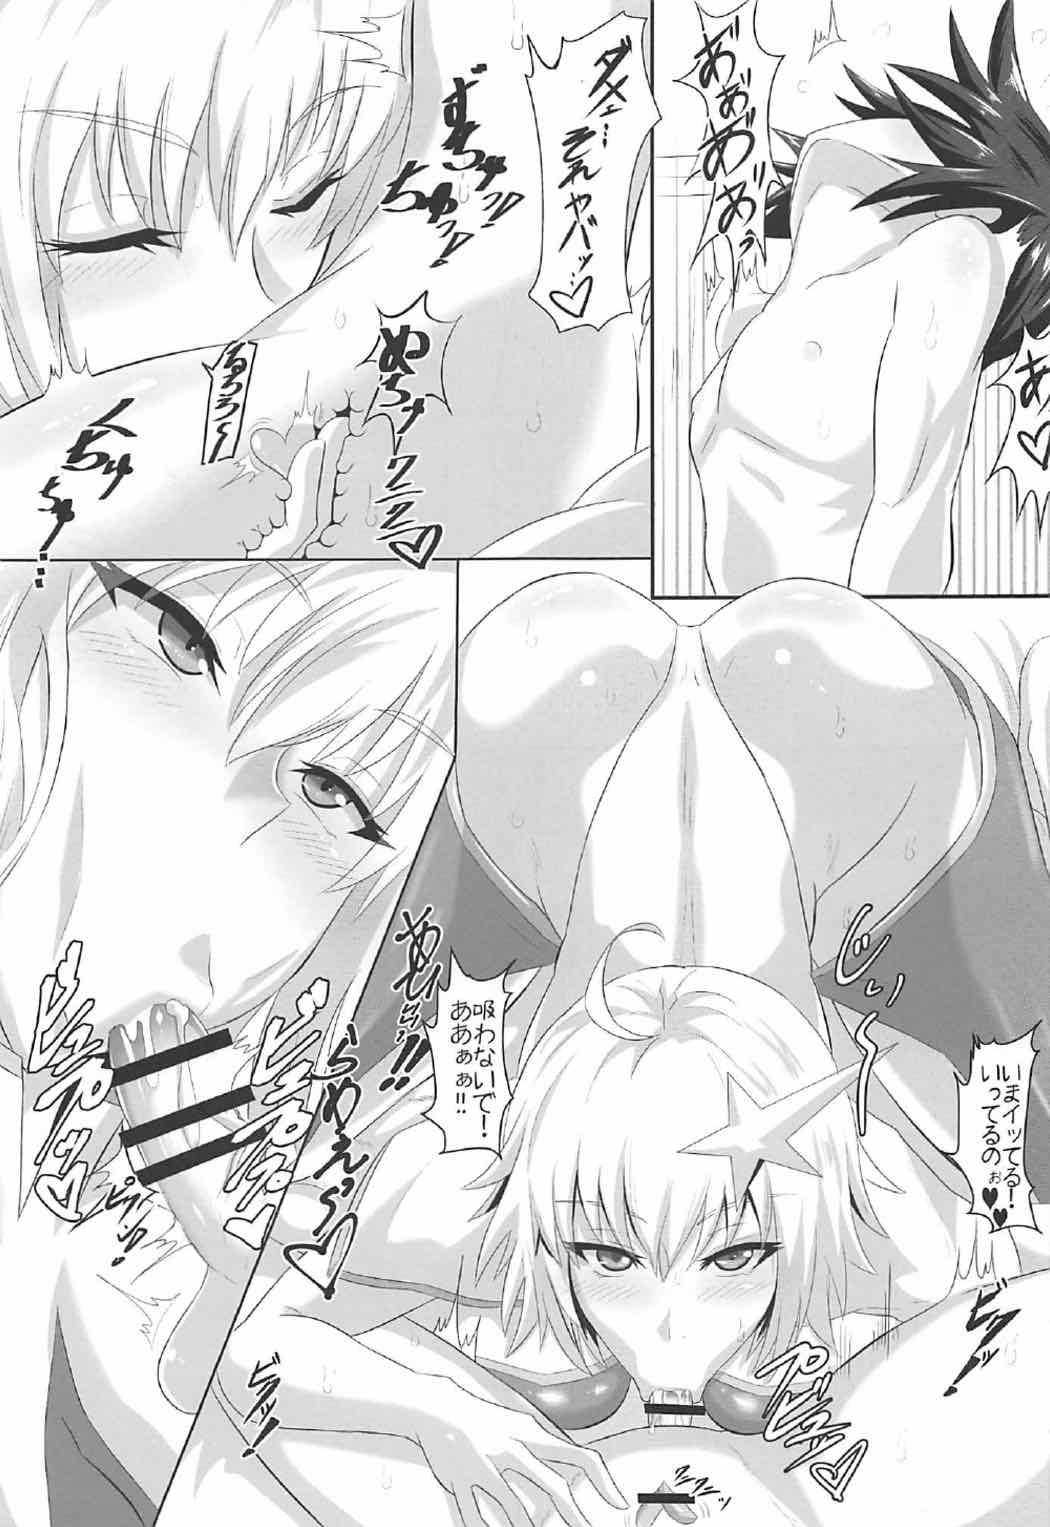 Family Gehenna 6 - Fate grand order Oldvsyoung - Page 8